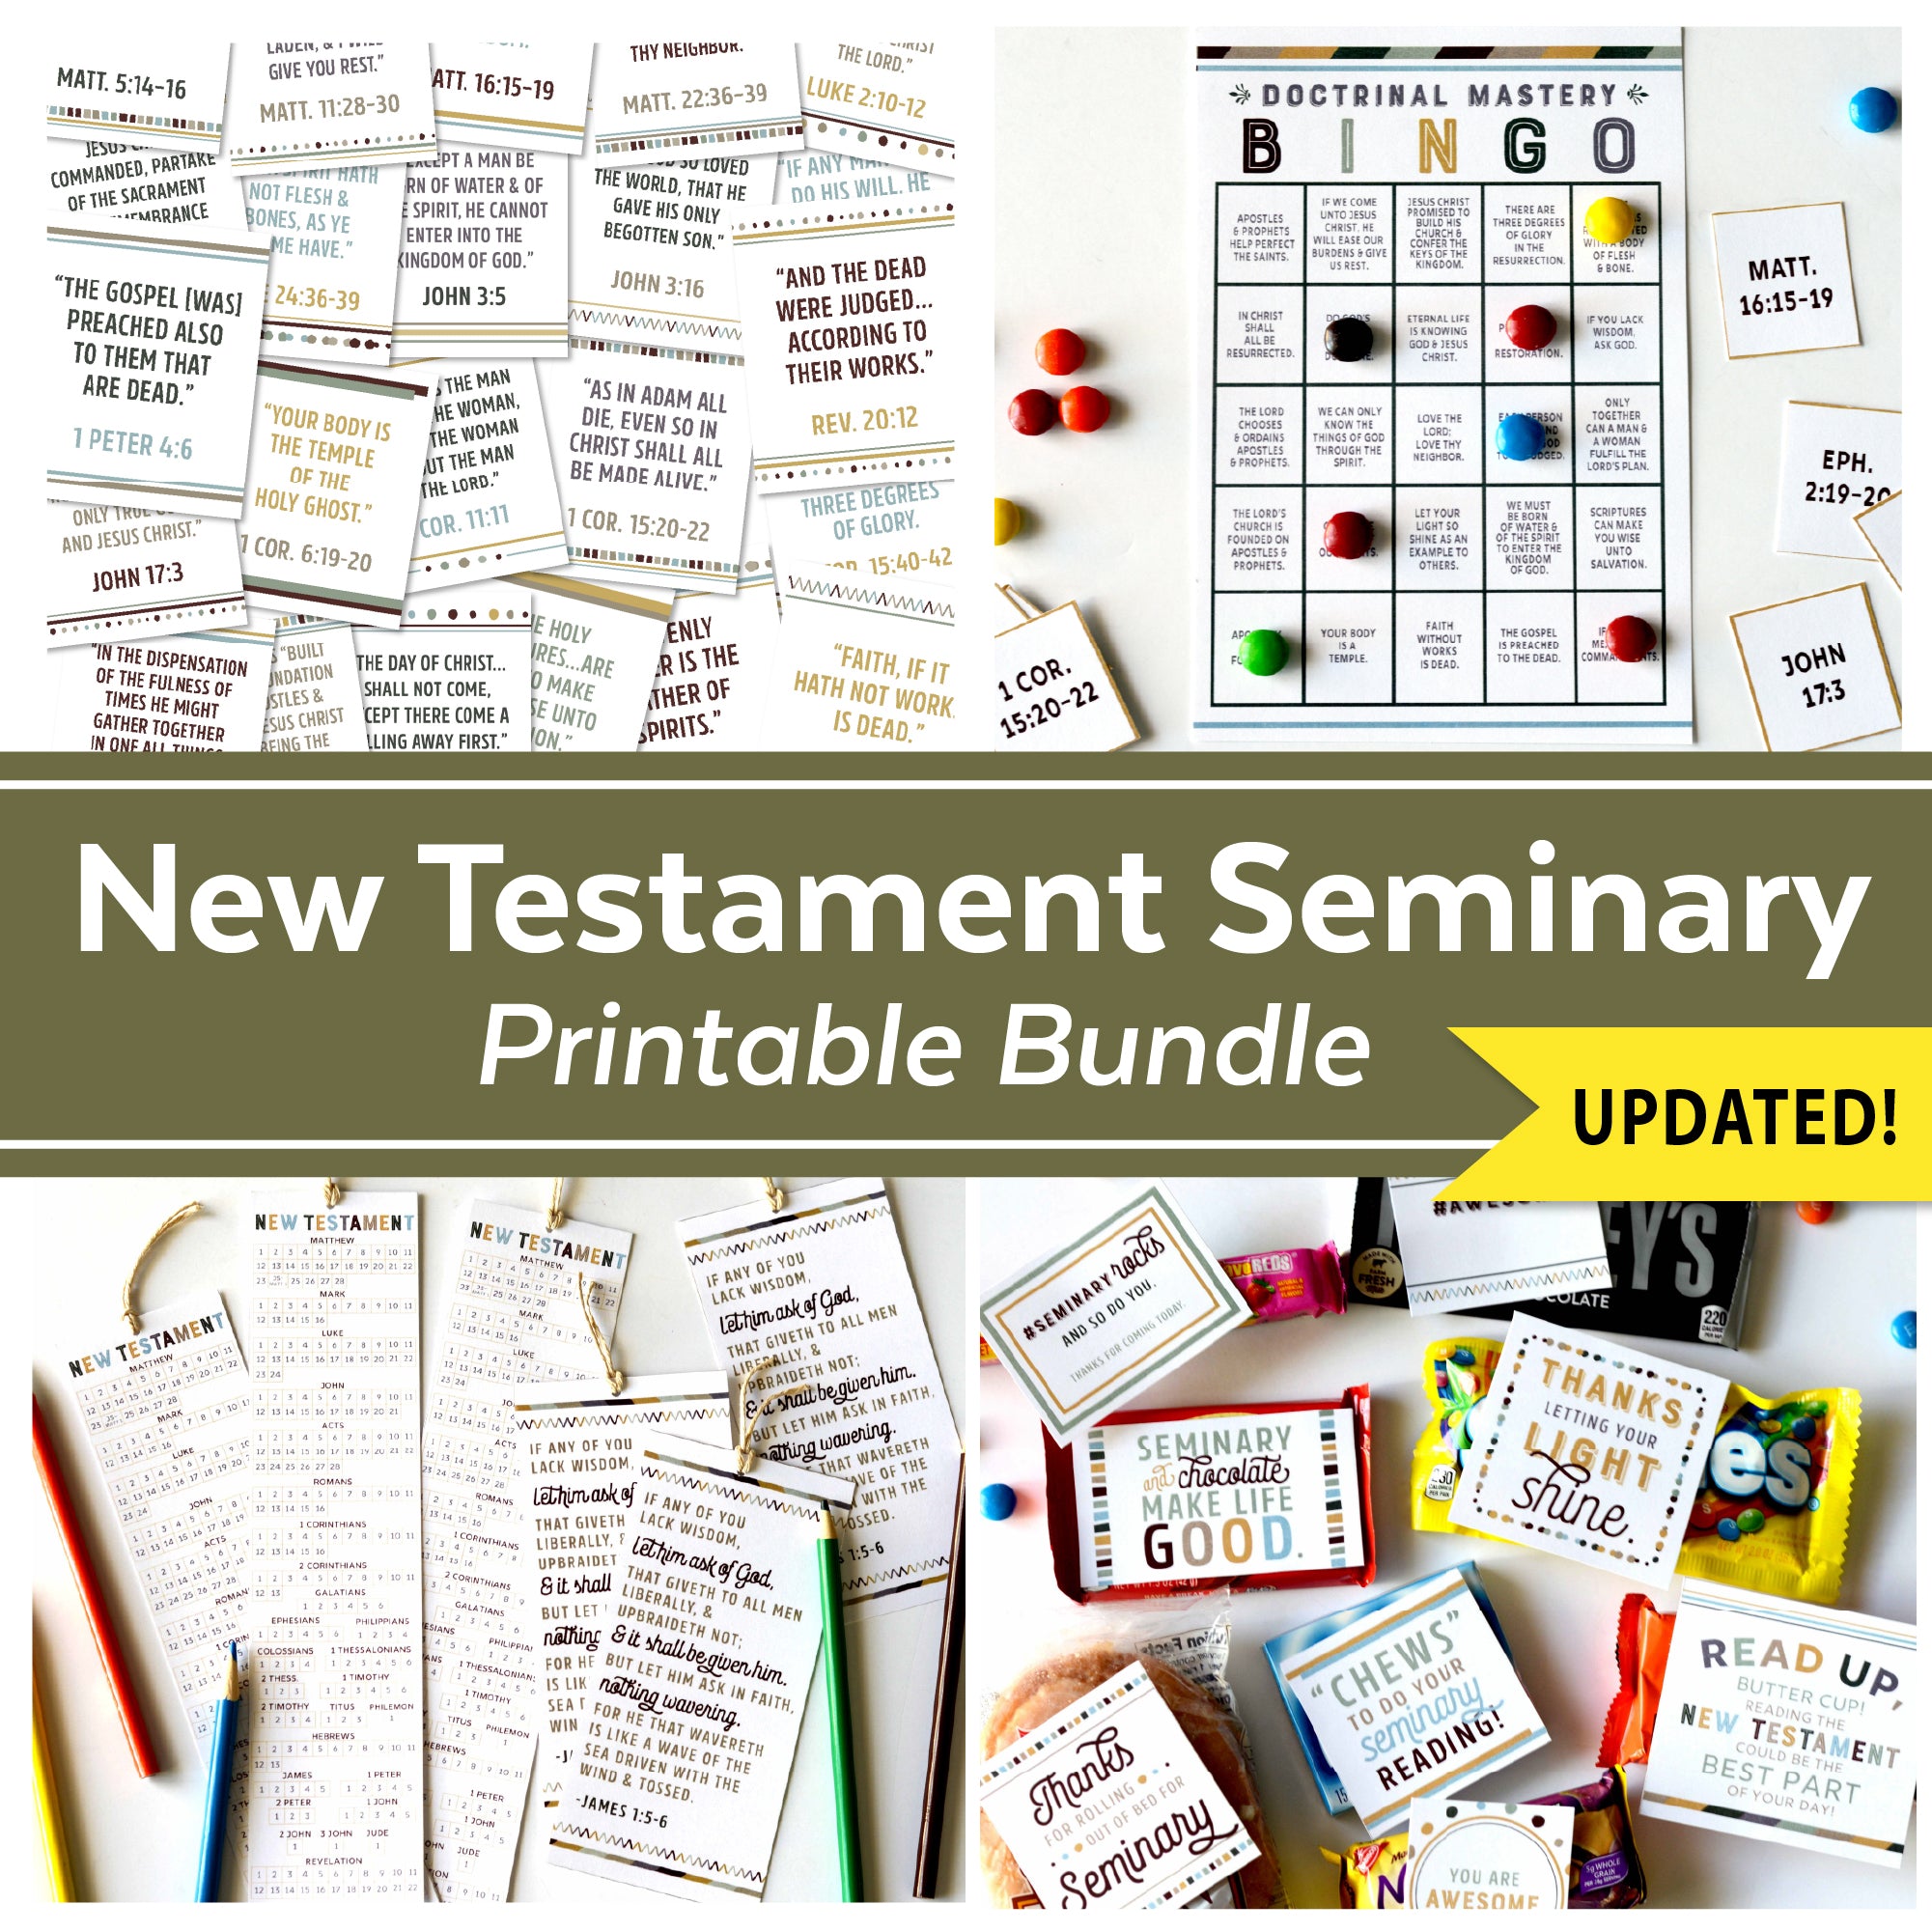 New Testament Doctrinal Mastery - Scripture Stickers (PDF Download)